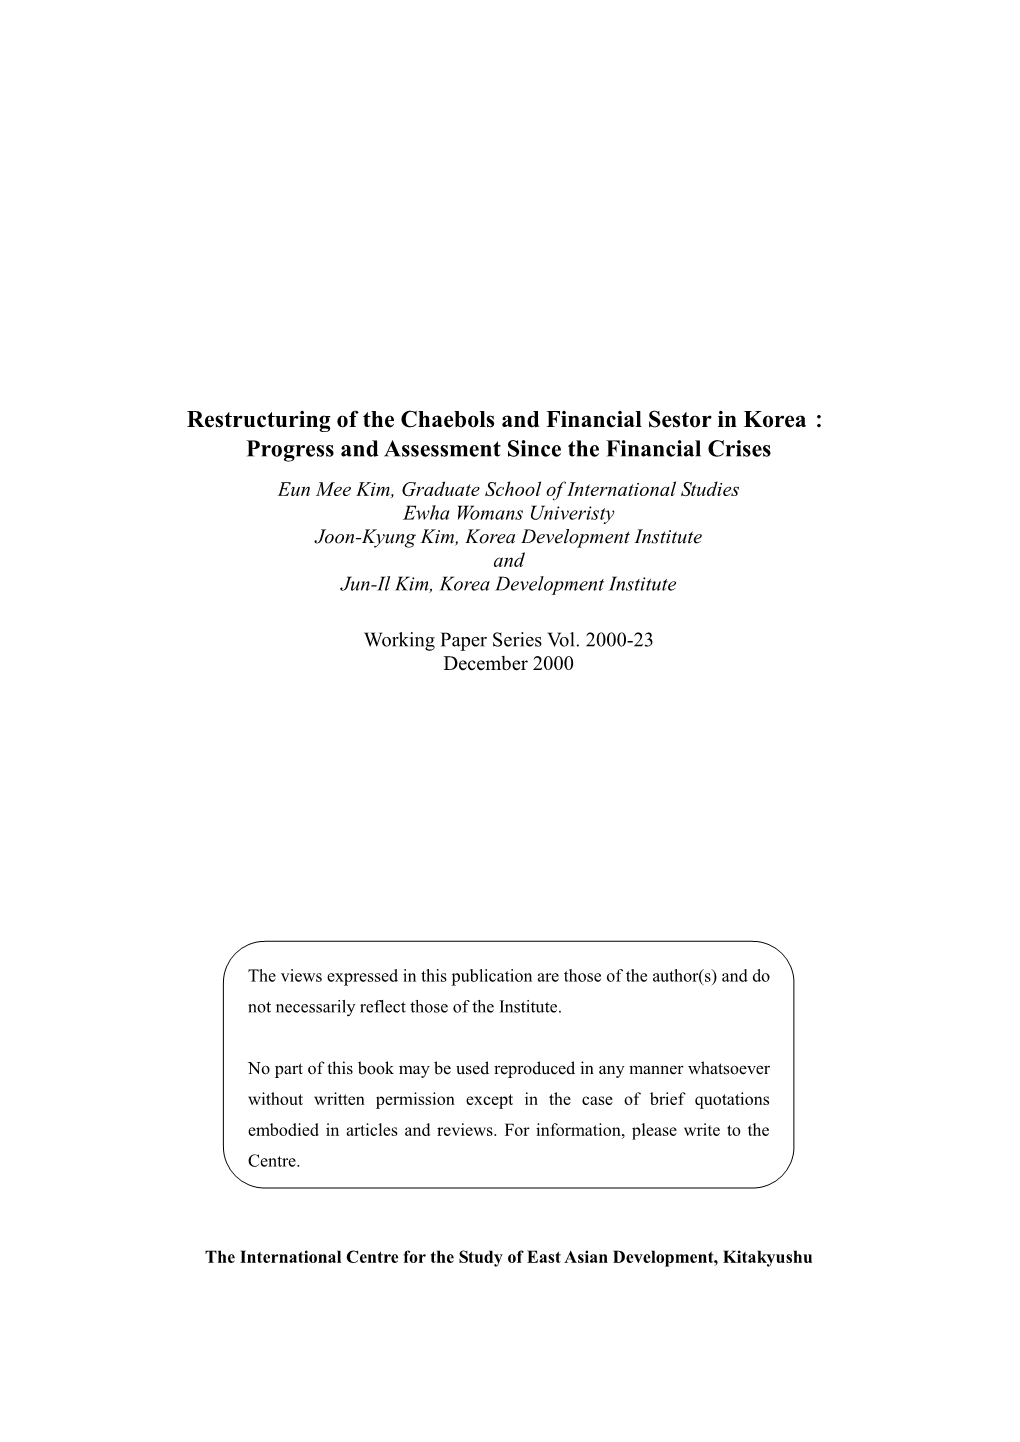 Restructuring of the Chaebols and Financial Sestor in Korea： Progress and Assessment Since the Financial Crises